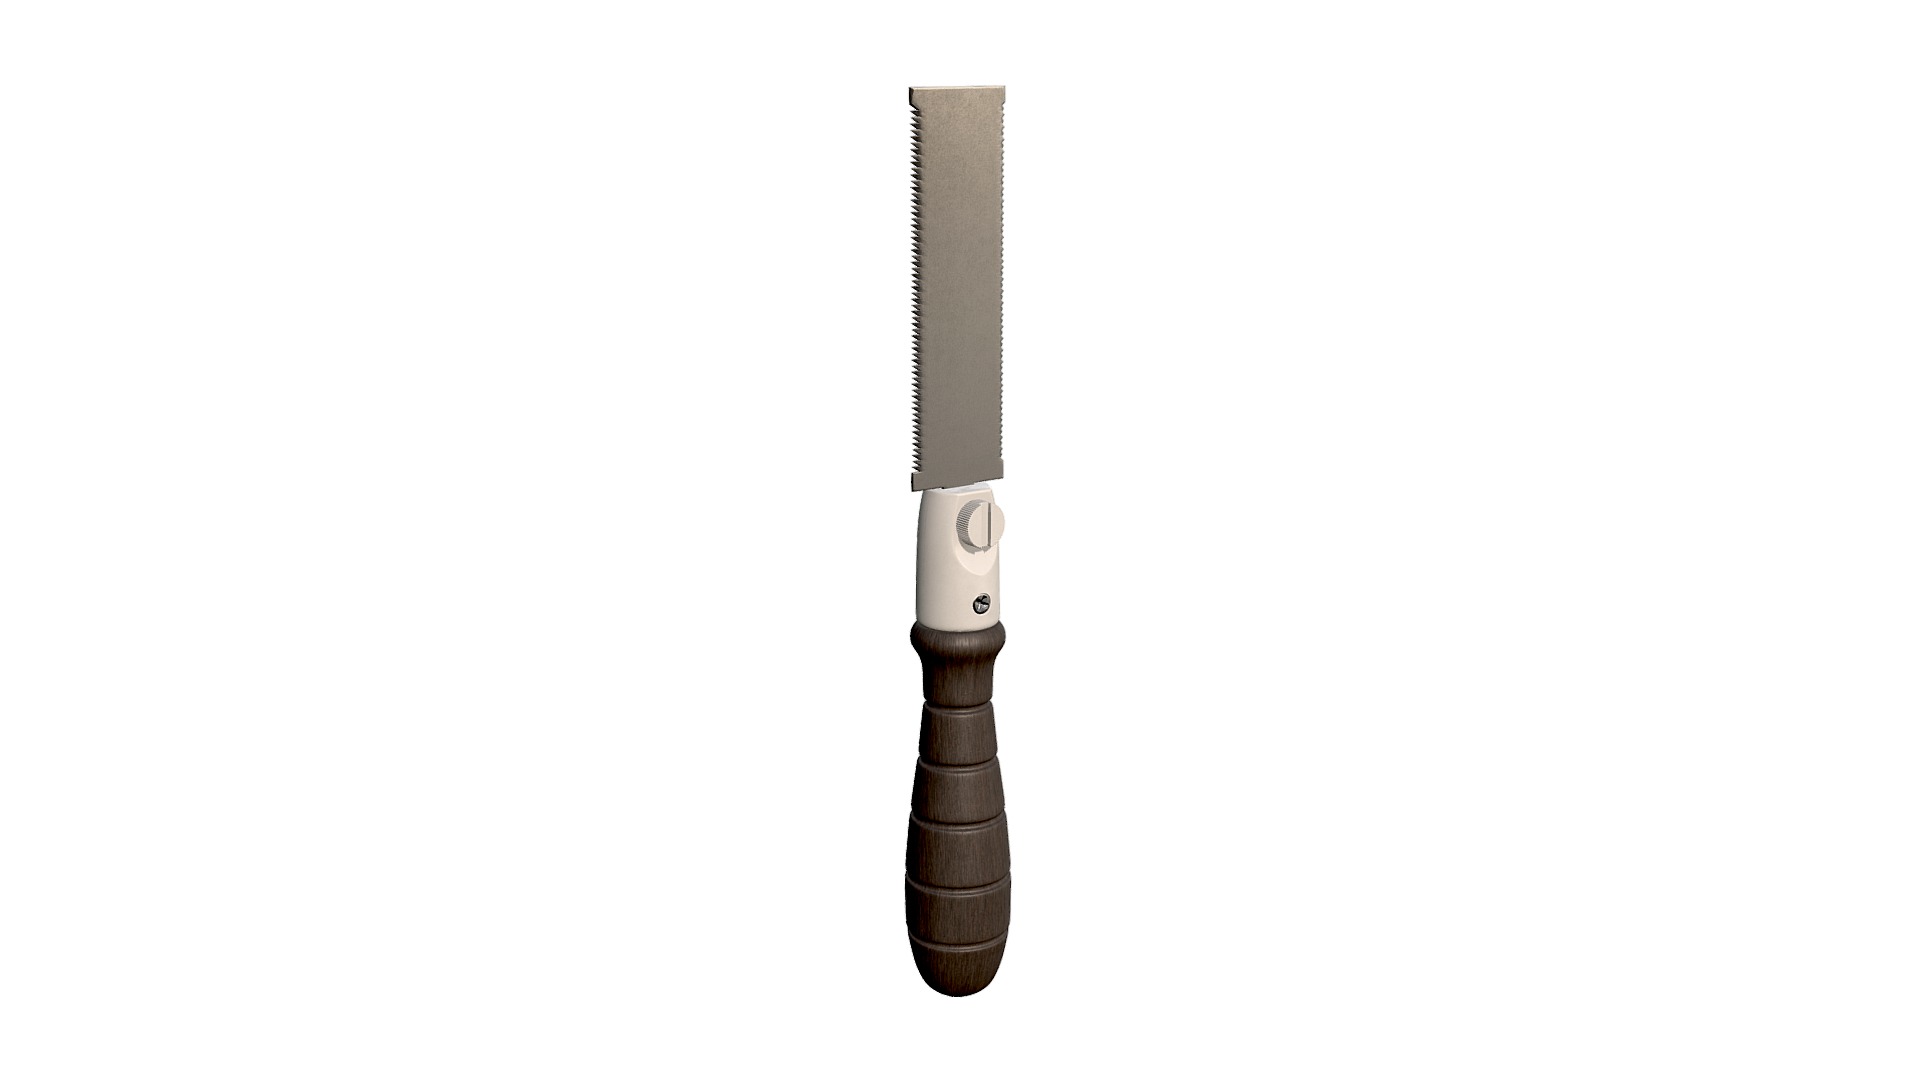 3D model Mini flush cut pull saw - This is a 3D model of the Mini flush cut pull saw. The 3D model is about a black and silver knife.